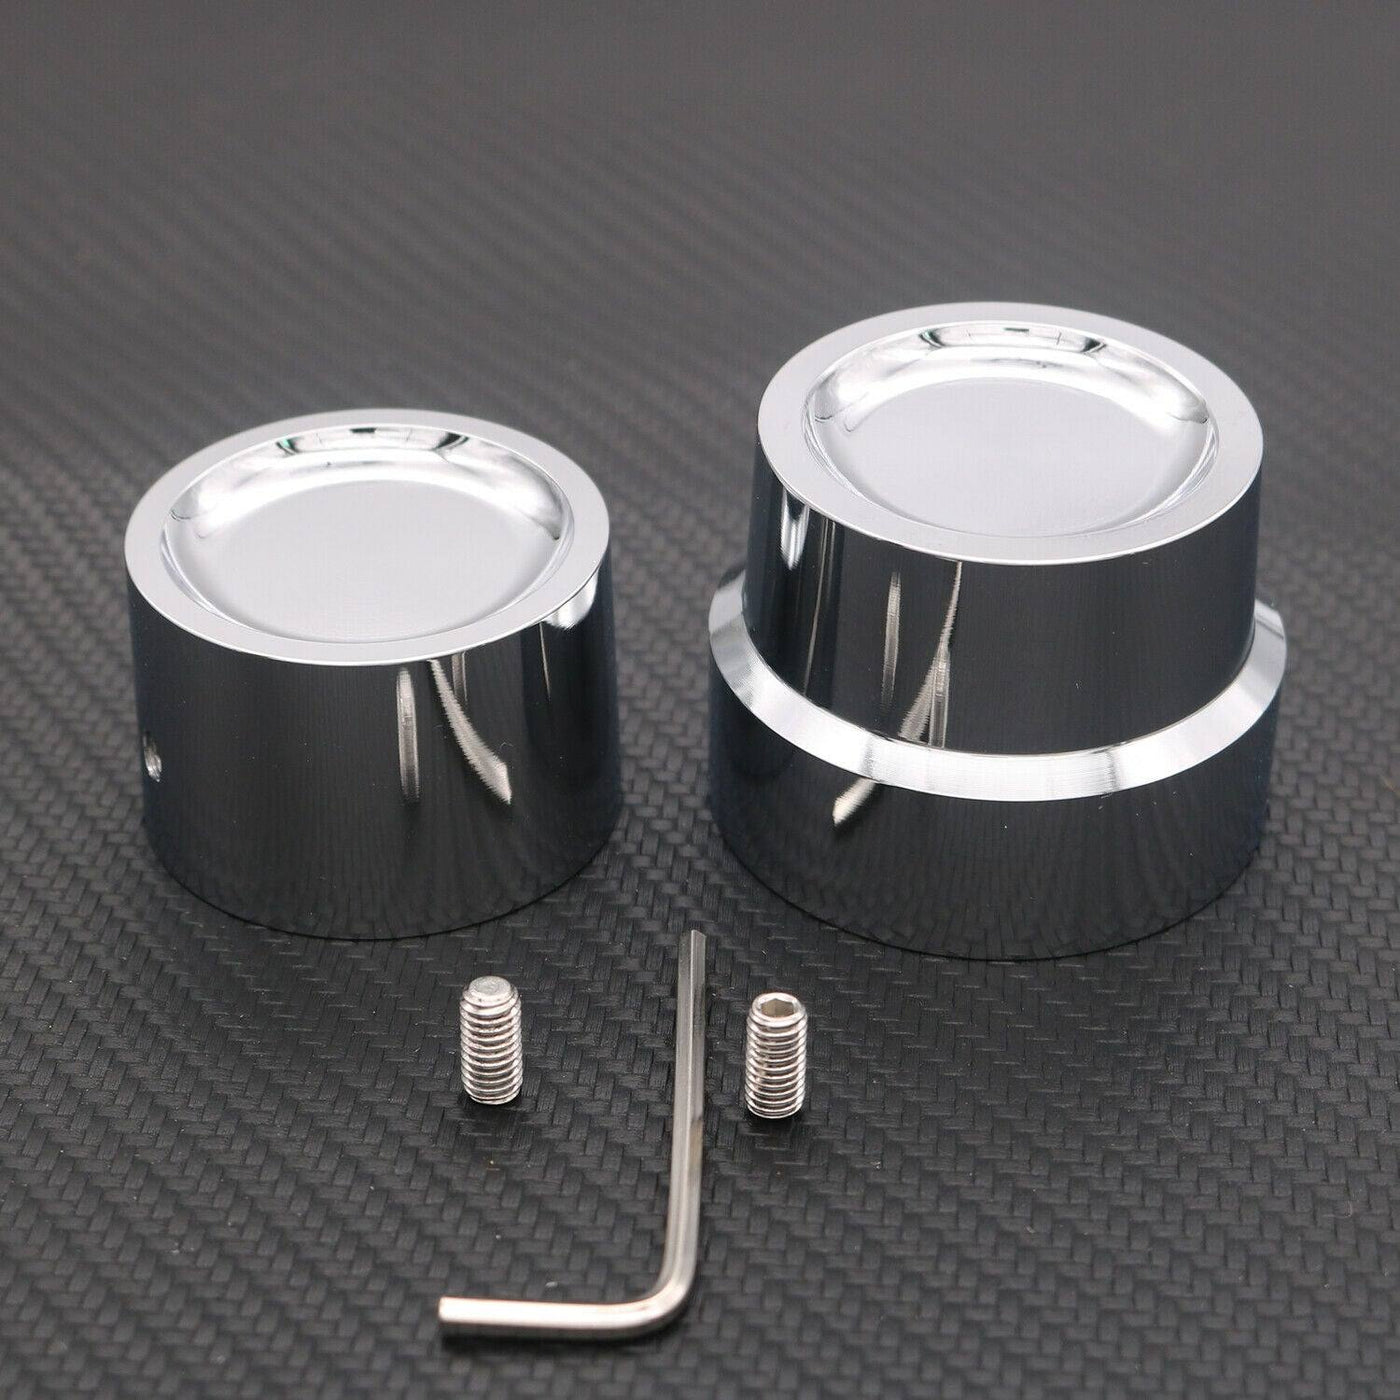 Chrome Front+Rear Axle Cap Nut Covers For Harley Dyna Softail Sportster Touring - Moto Life Products